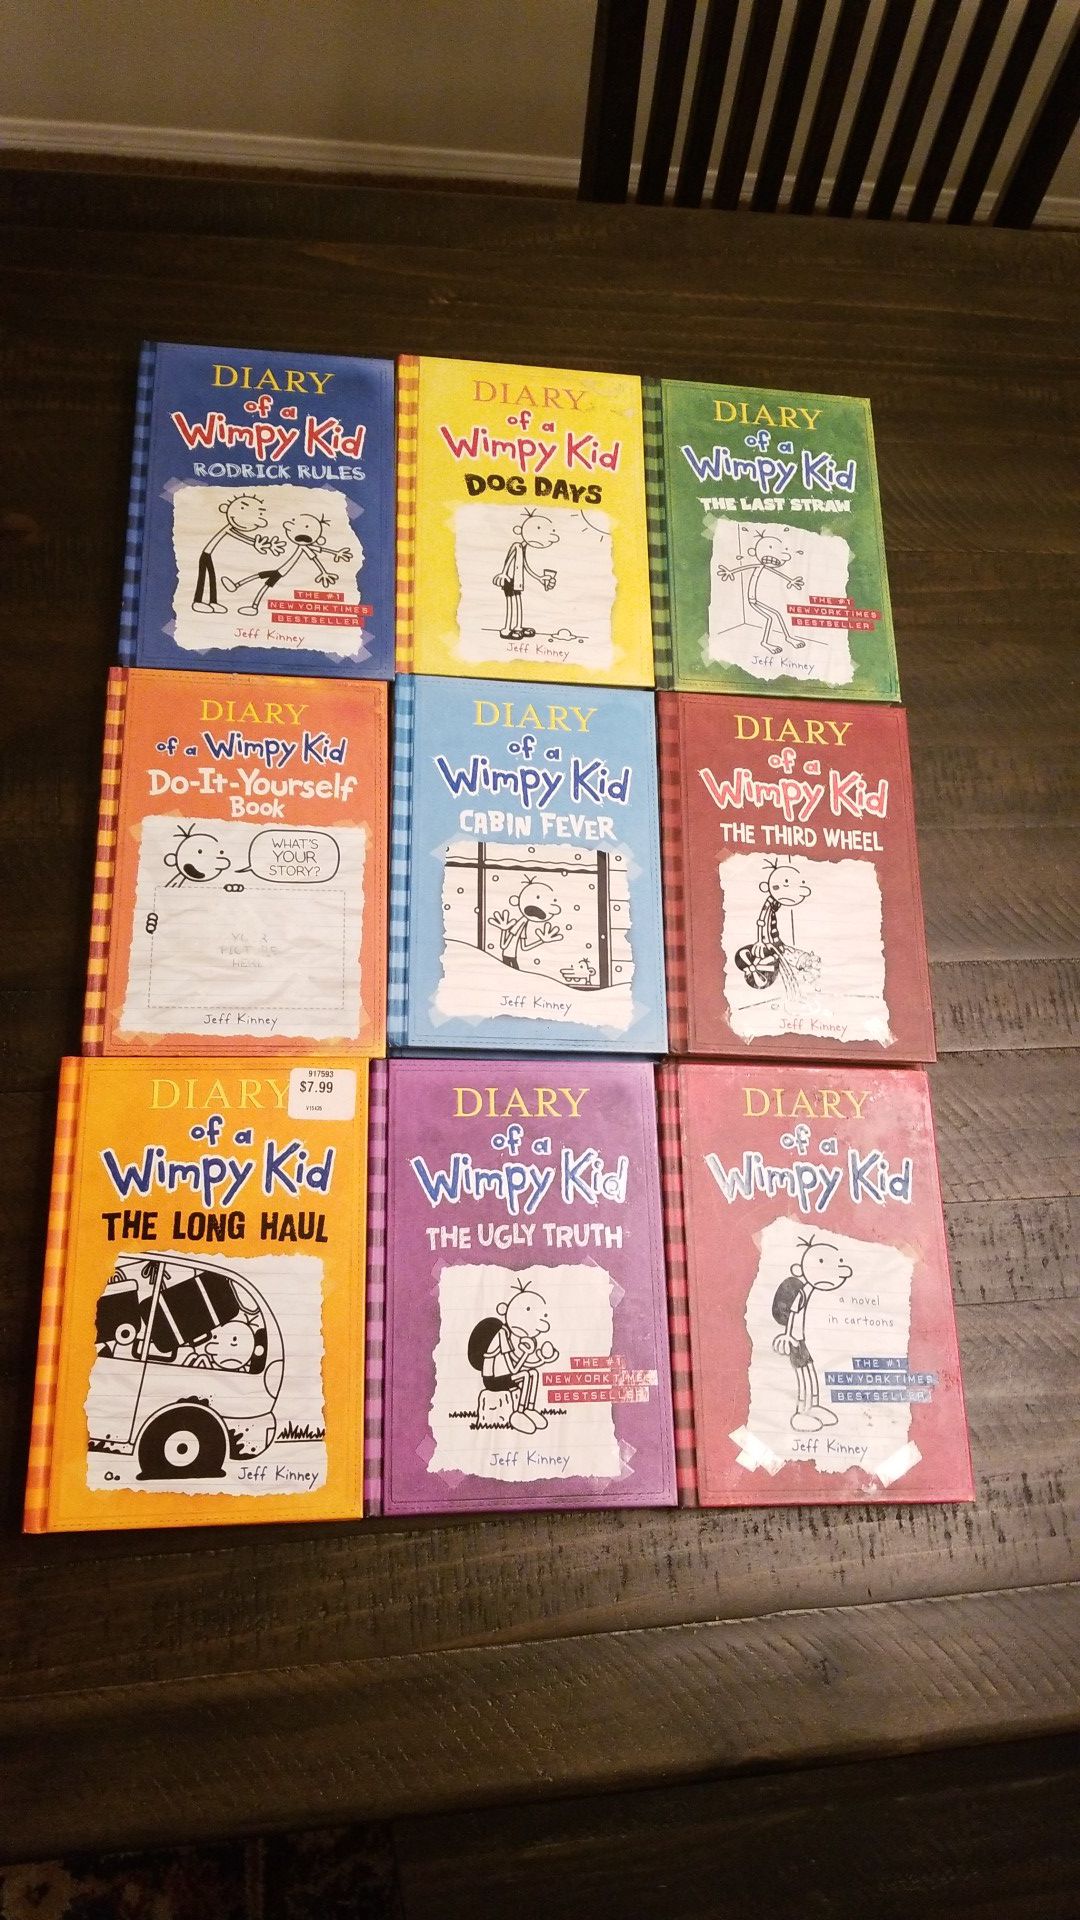 Diary of a Wimpy Kid set